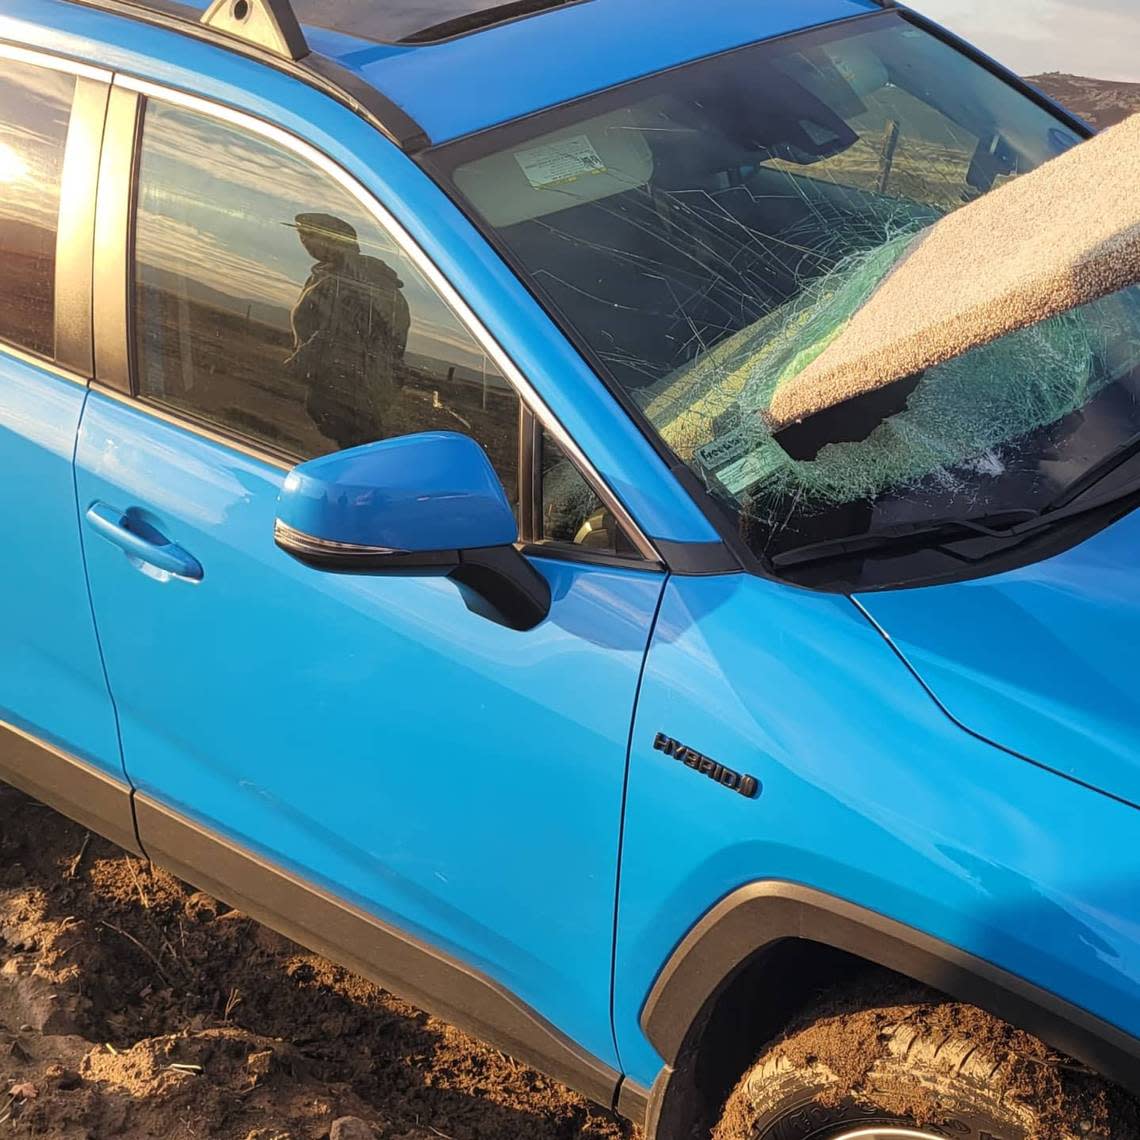 A wood plank smashed through the window of an SUV while the driver was on her way to work in Madera, CA.